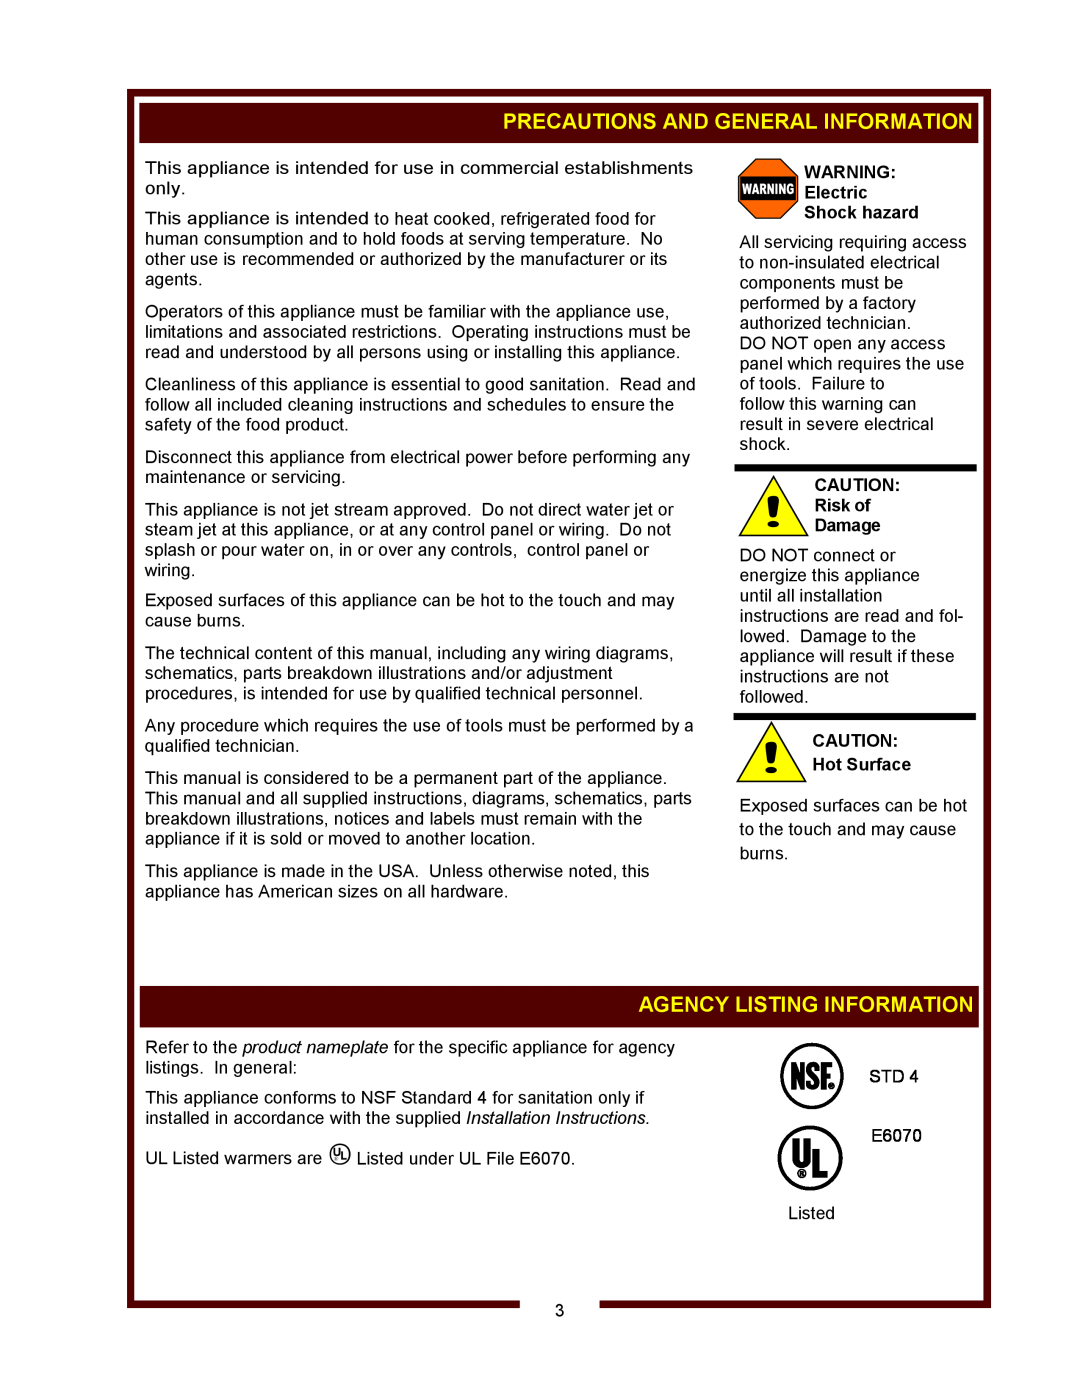 Wells HW-10 Precautions And General Information, Agency Listing Information, WARNING Electric Shock hazard, Risk of Damage 